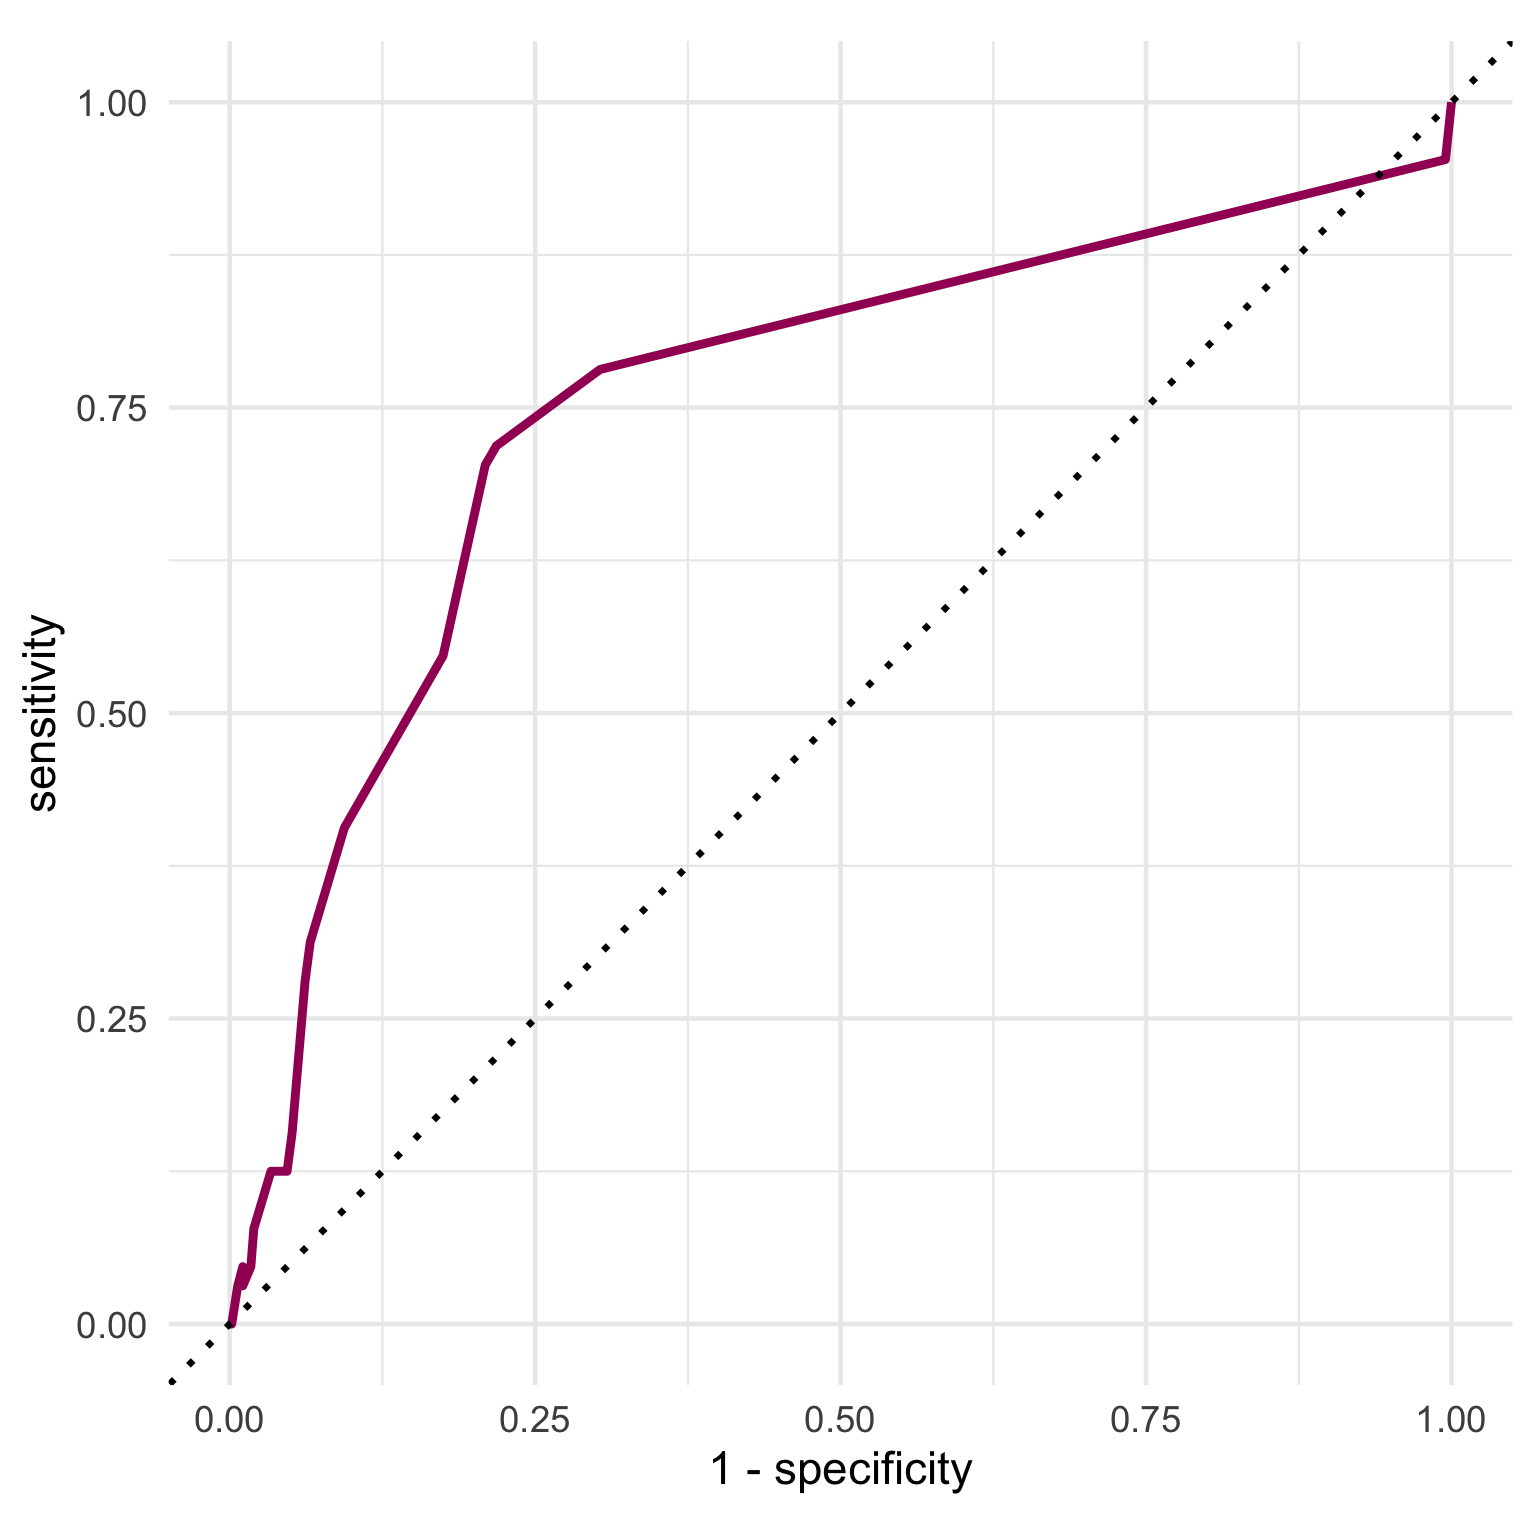 A line graph representing the ROC (Receiver Operator Characteristic) curve. The X-axis represents 1 minus specifity and the Y-axis represent sensitvity. A dotted line at a 45 degree angle represents an AUC (area under the curve) of 0.5. The ROC curve peaks about midway between the top left corner and the dotted line with a sensitivity of around 0.75 and 1 minus specifity around 0.25.